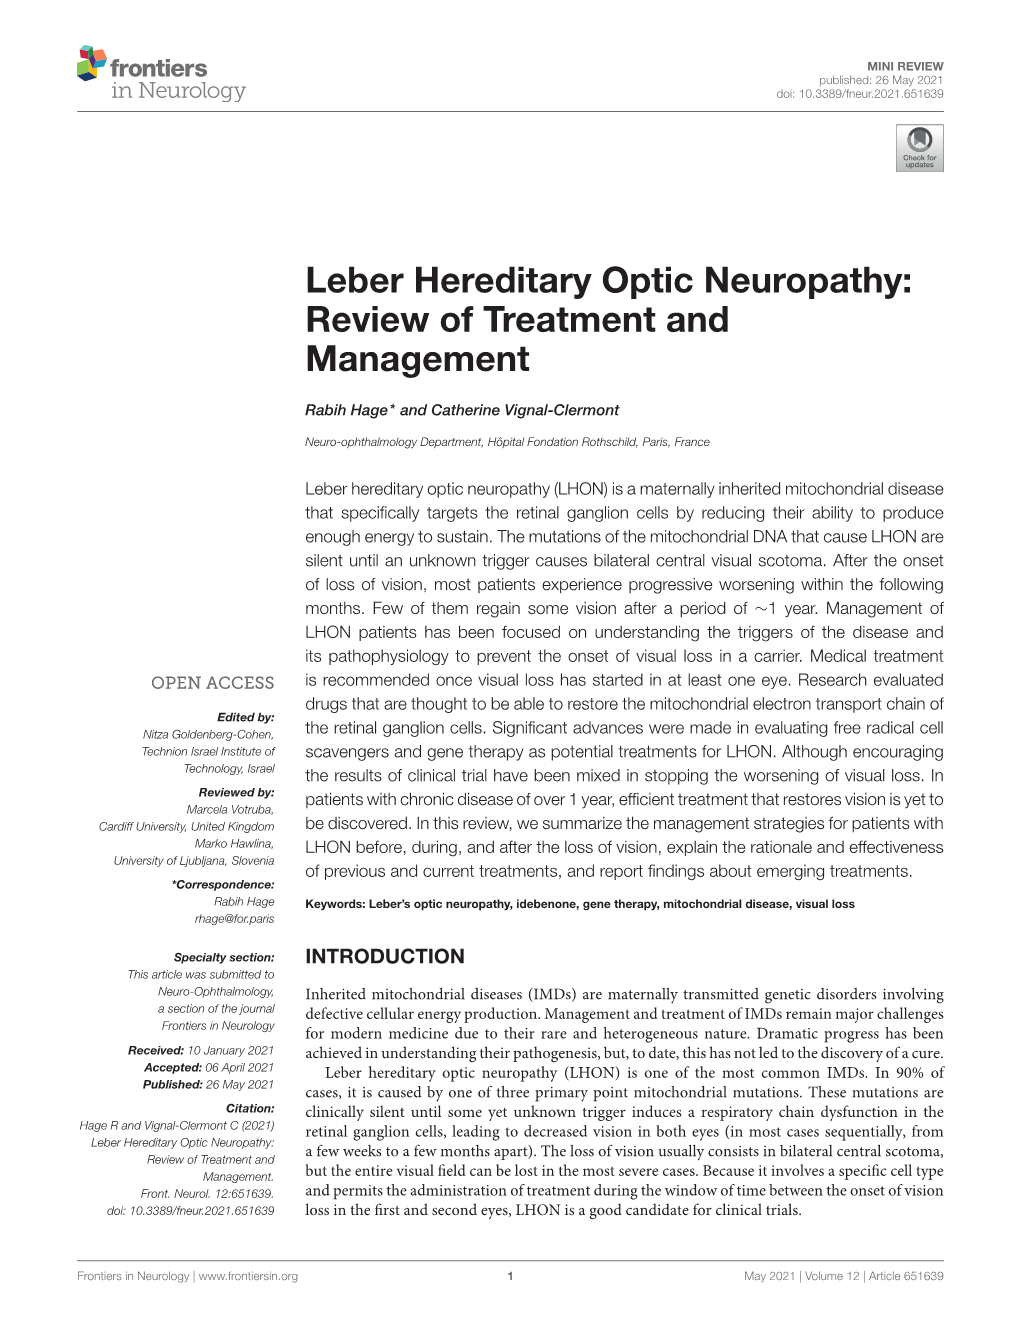 Leber Hereditary Optic Neuropathy: Review of Treatment and Management